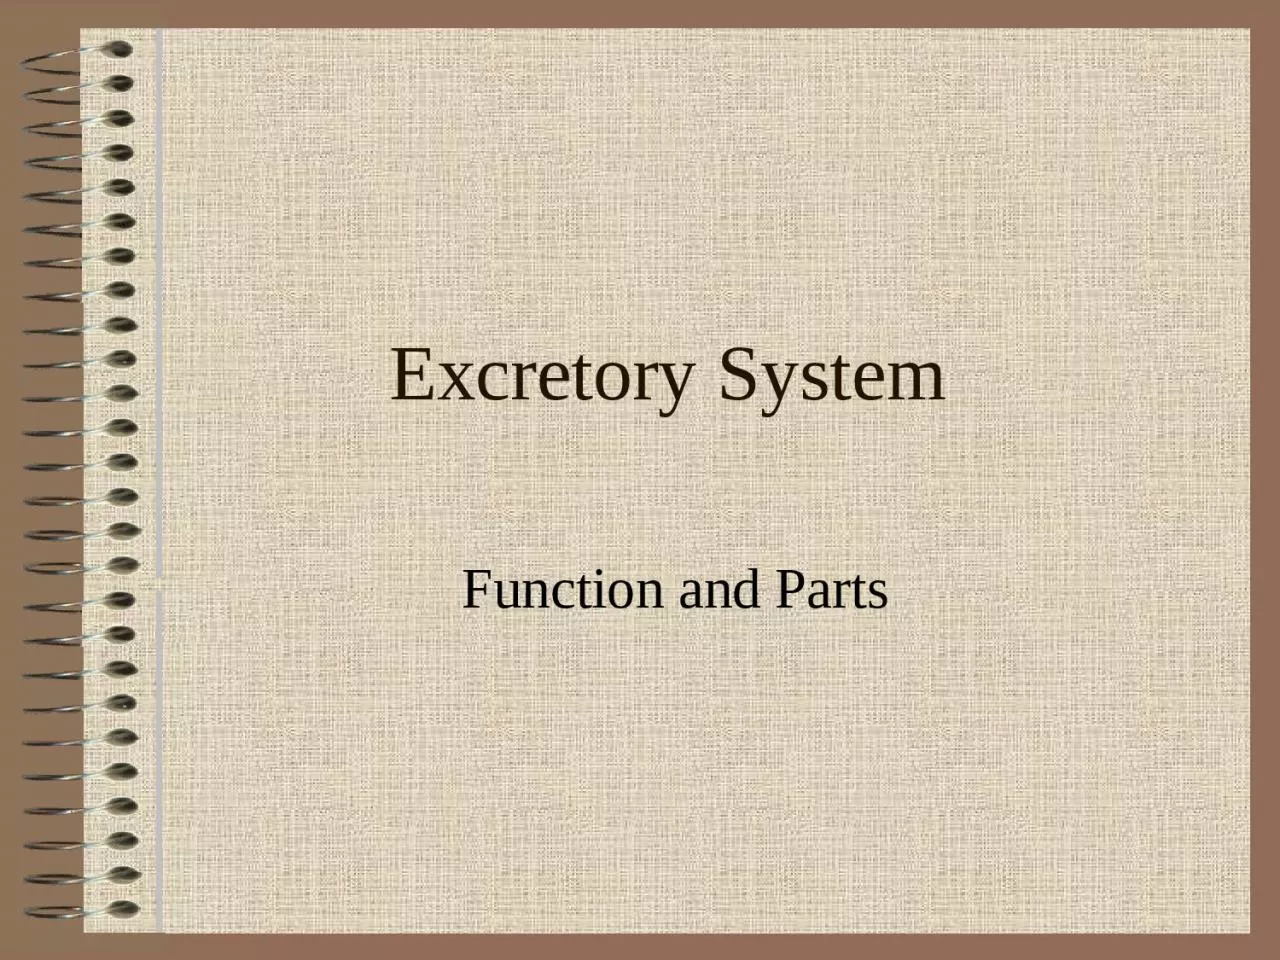 Excretory System Function and Parts